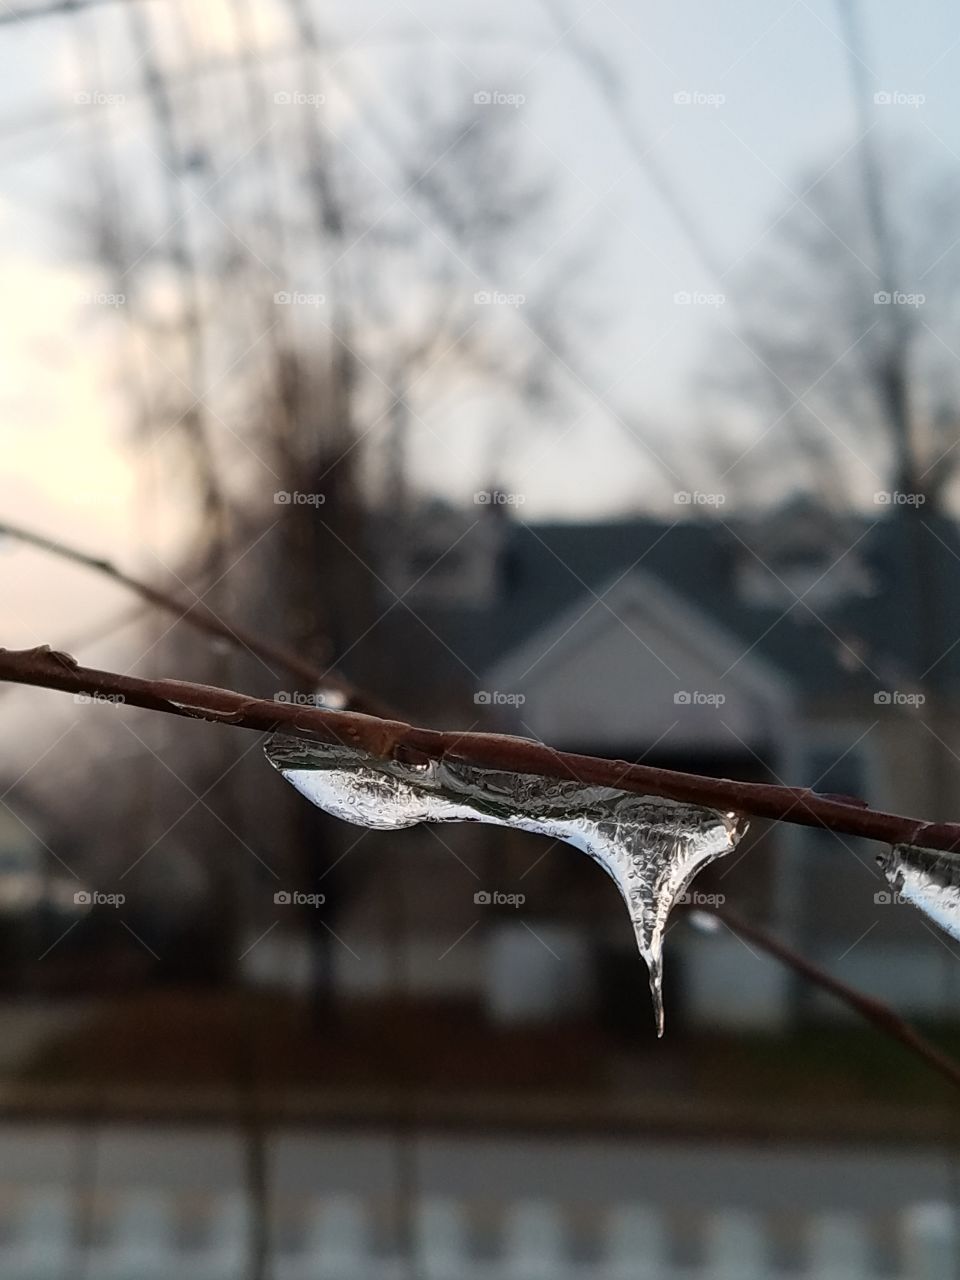 icy droplets